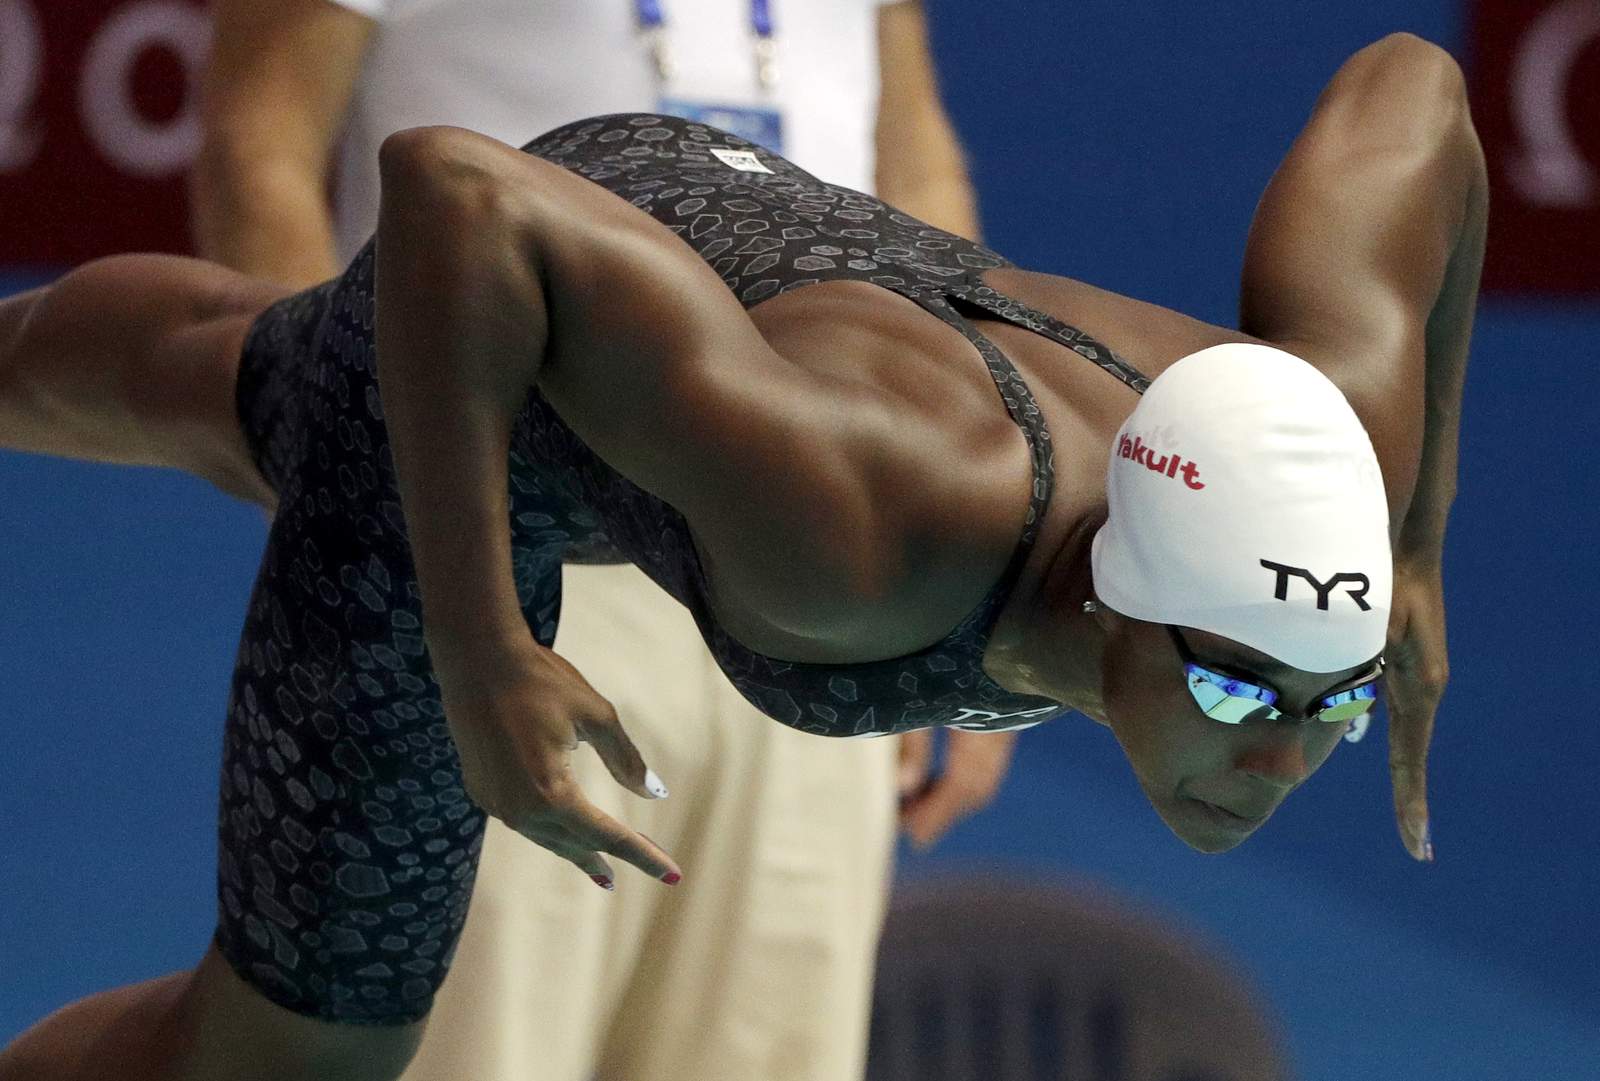 Simone says: Olympic champ pushes for change in, out of pool